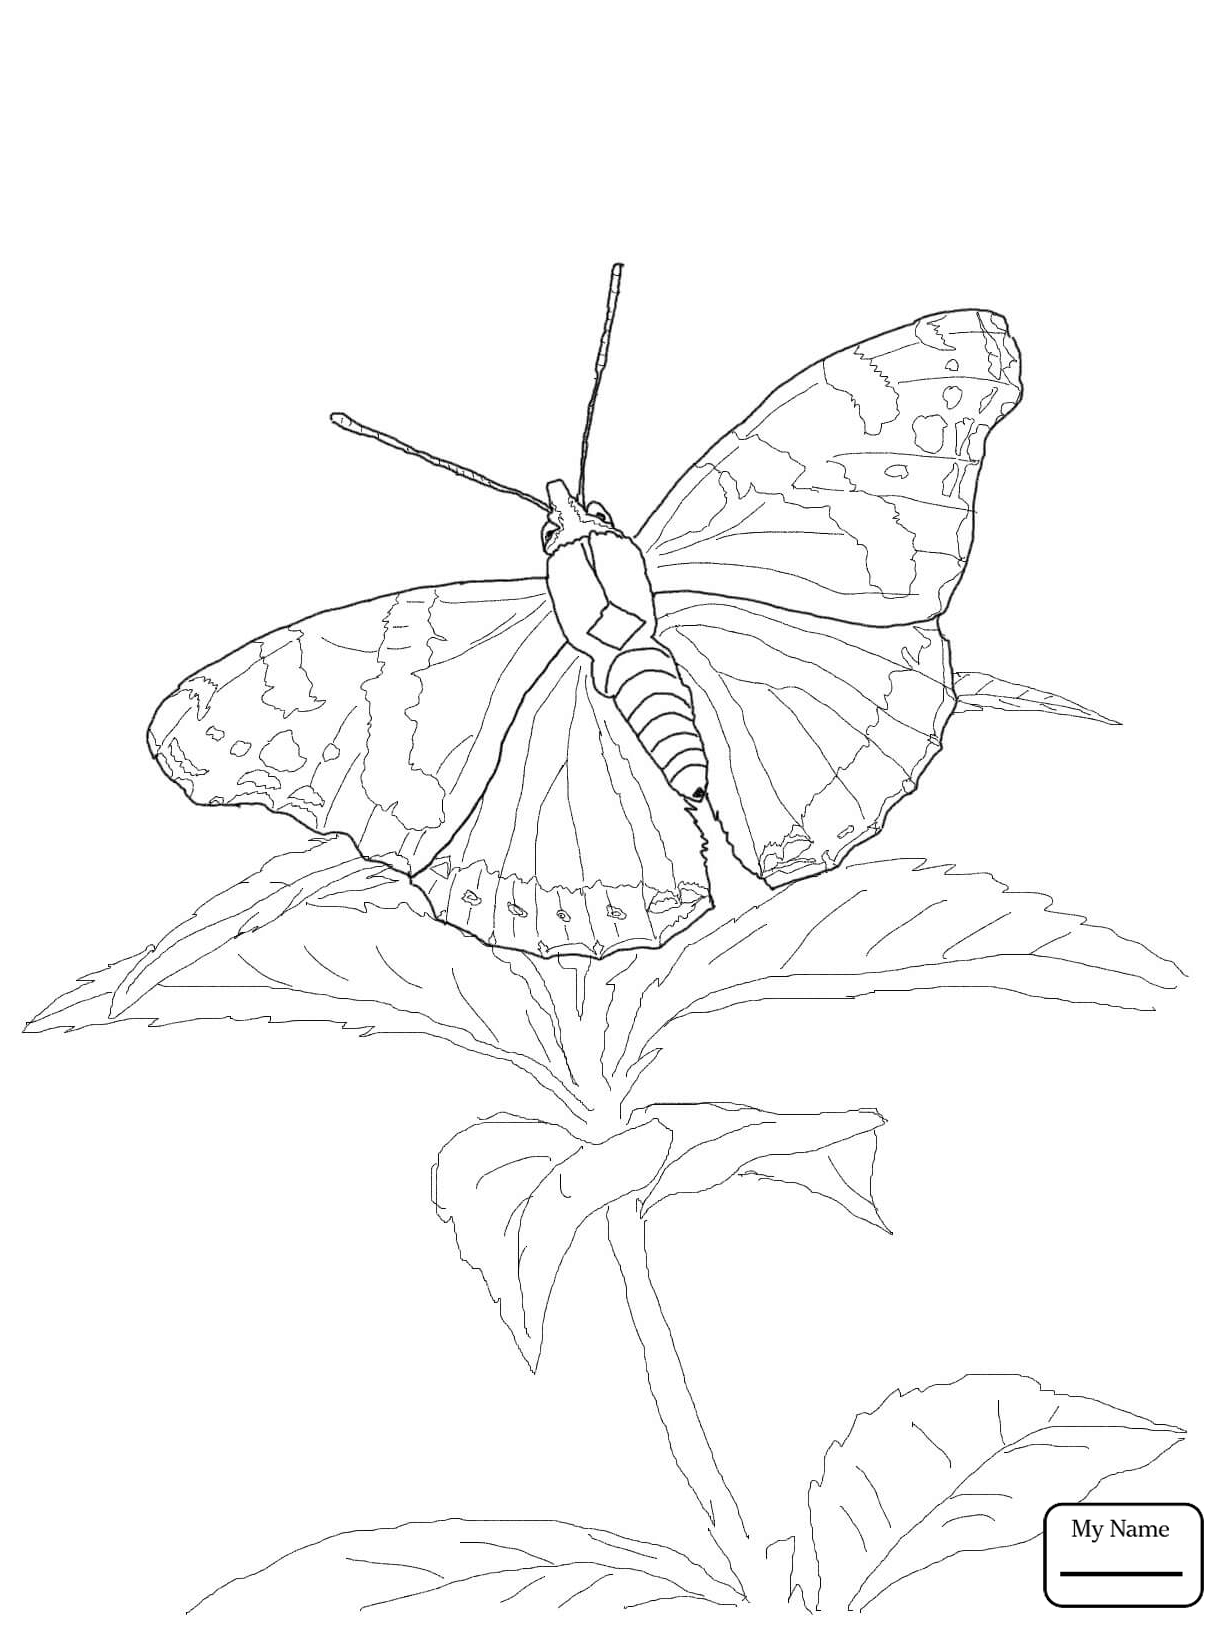 Blue Morpho Butterfly Coloring Page at GetColorings.com | Free